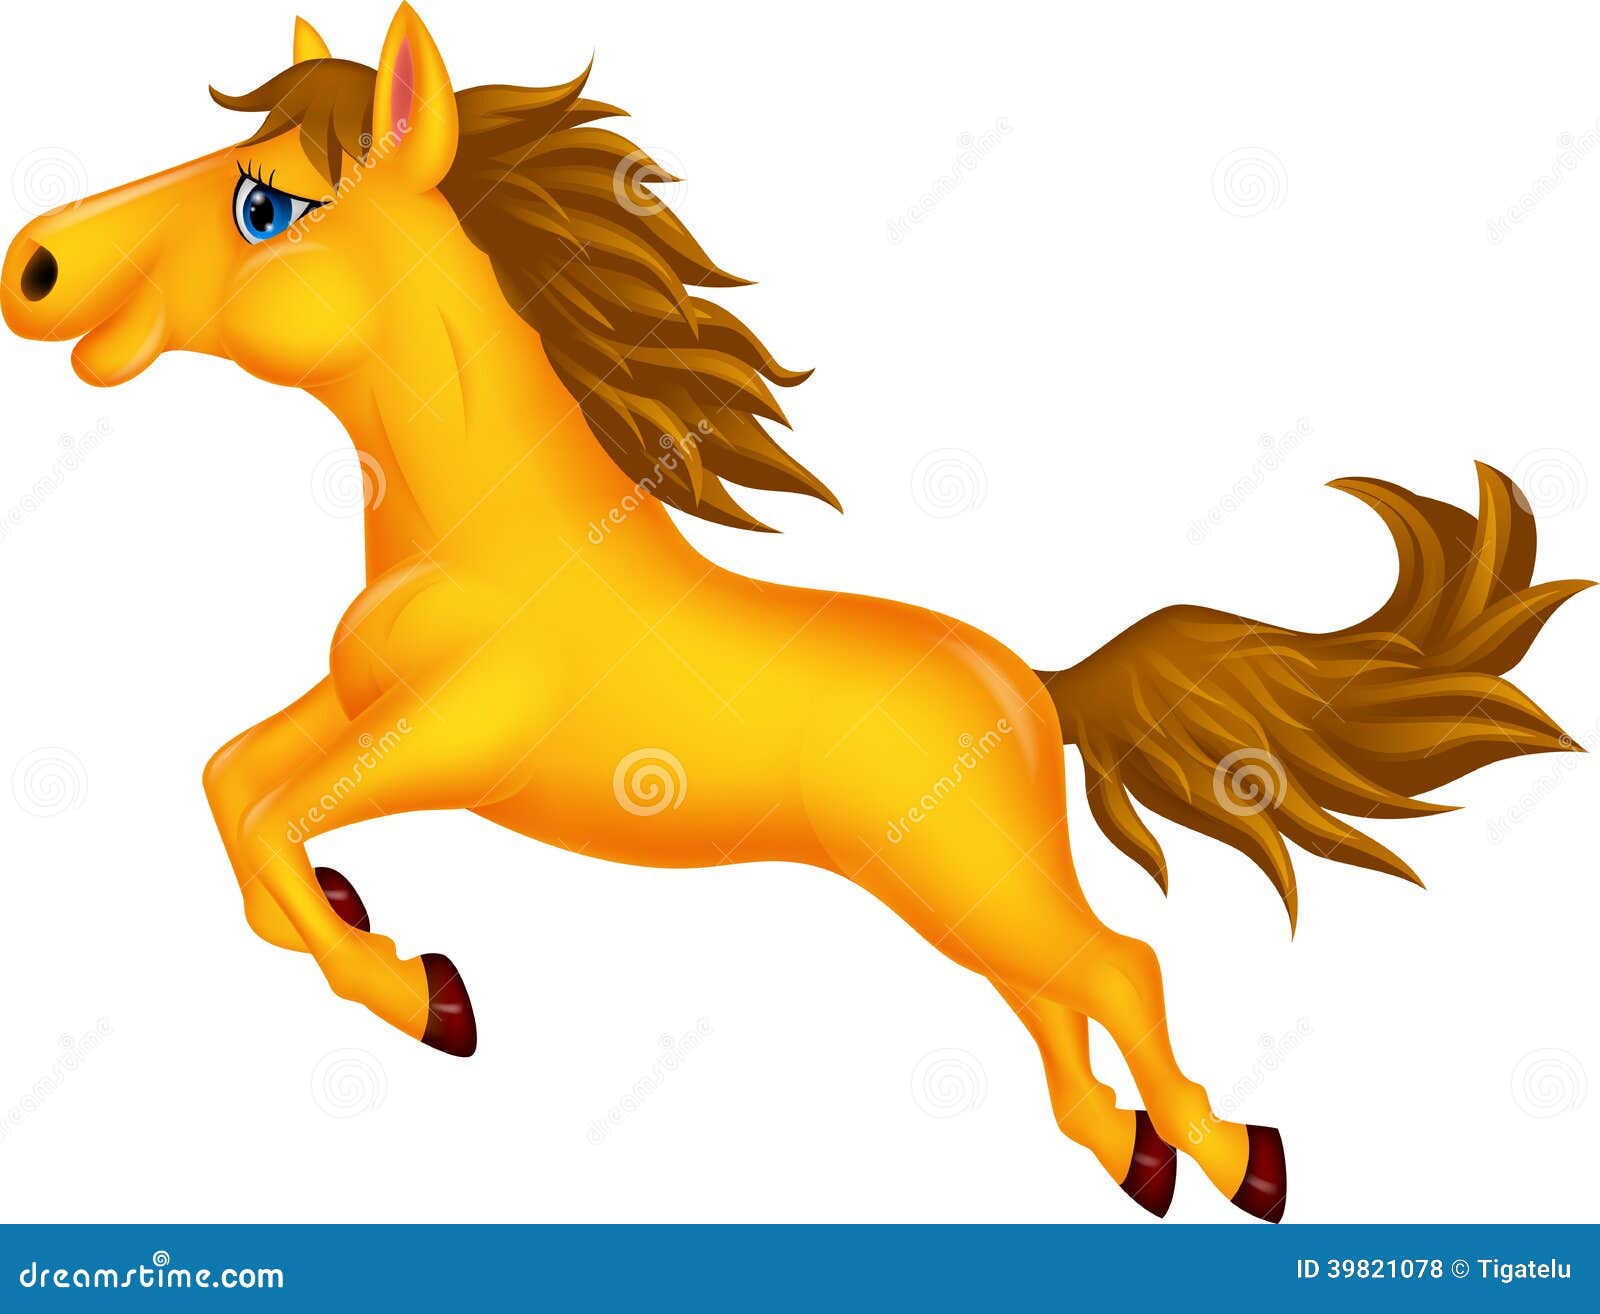 Horse Cartoon Muscles Stock Illustrations – 38 Horse Cartoon Muscles Stock  Illustrations, Vectors & Clipart - Dreamstime